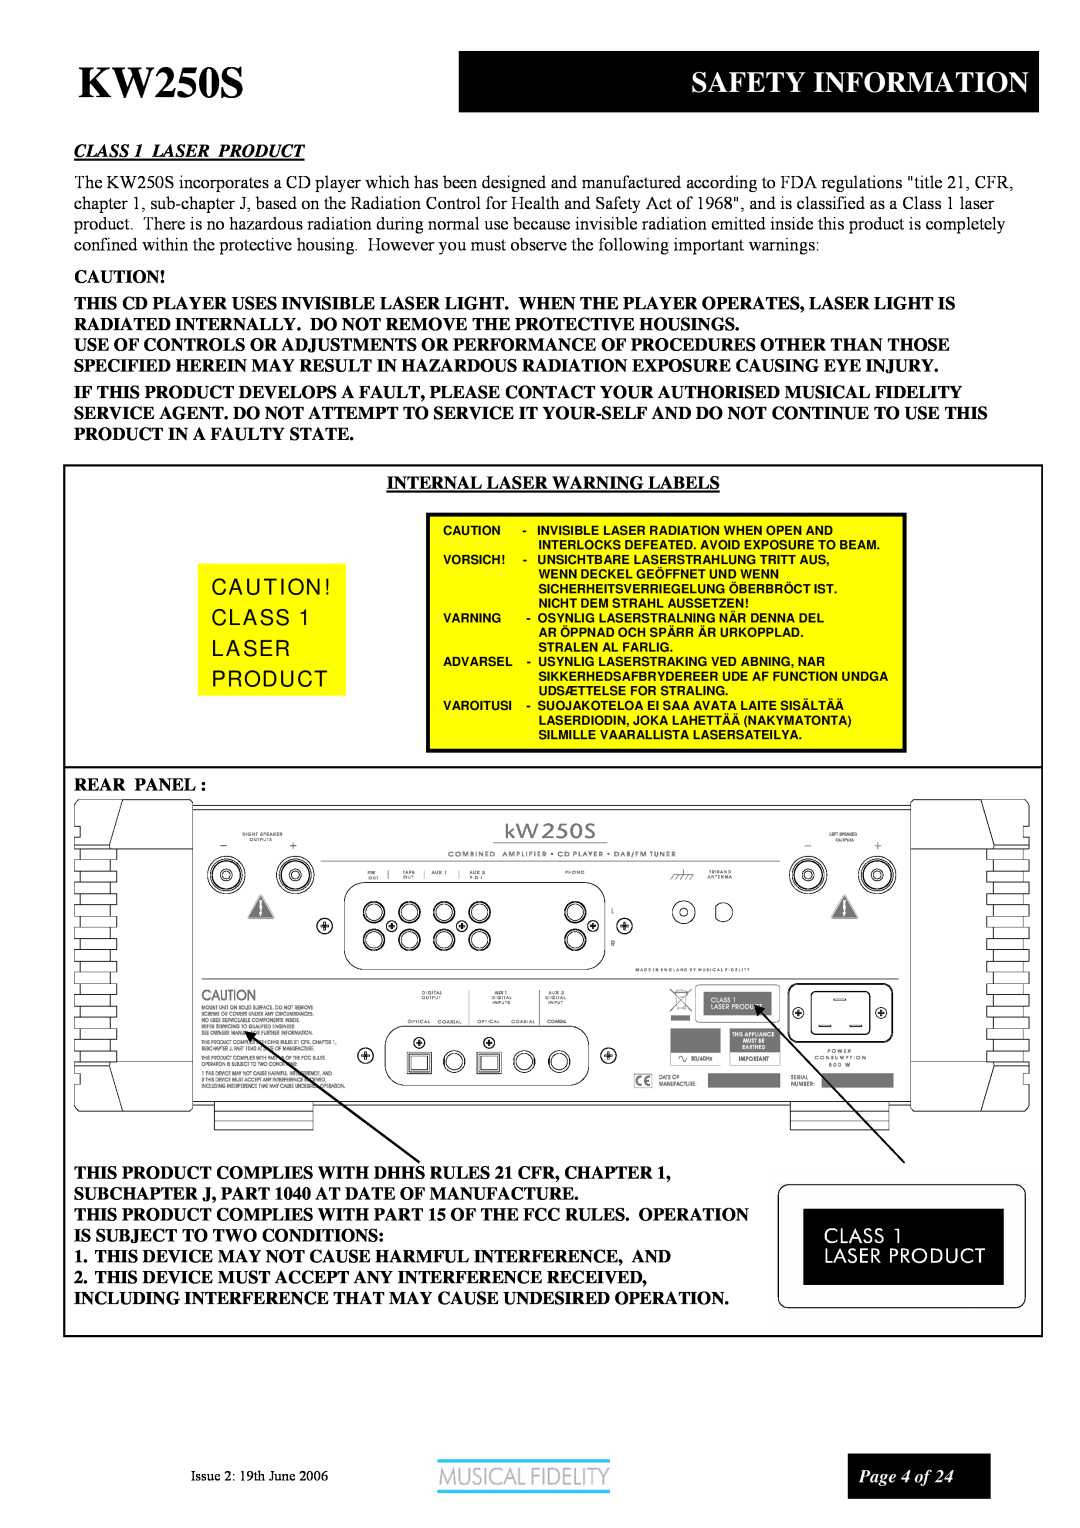 Musical Fidelity KW250S manual Safety Information, CAUTION! CLASS 1 LASER PRODUCT, Page 4 of 